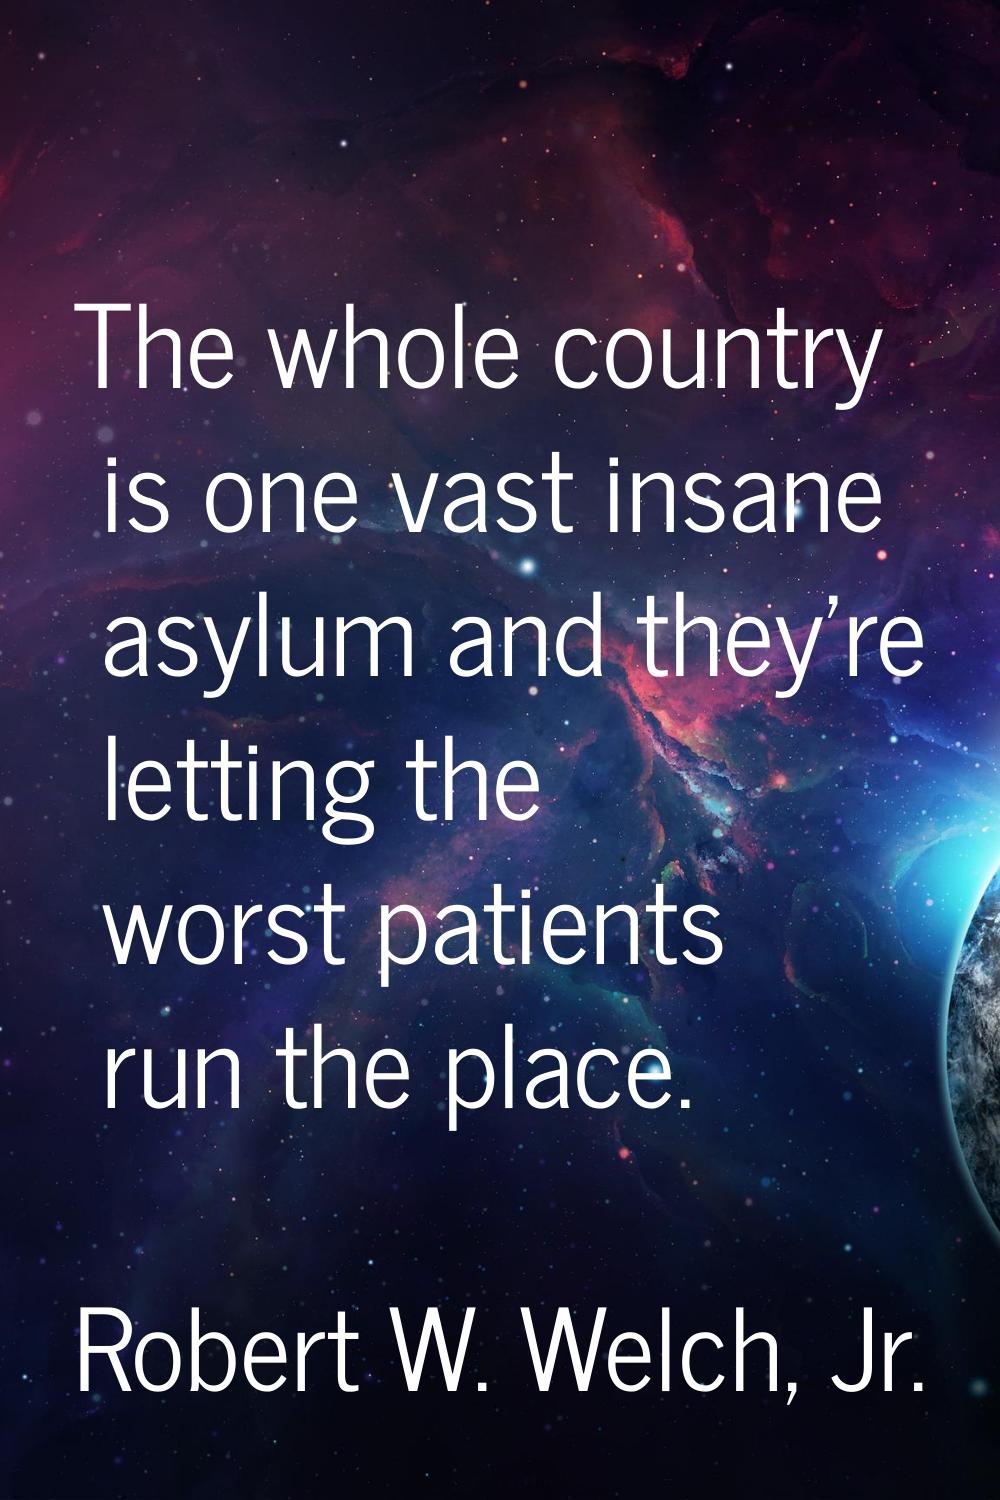 The whole country is one vast insane asylum and they're letting the worst patients run the place.